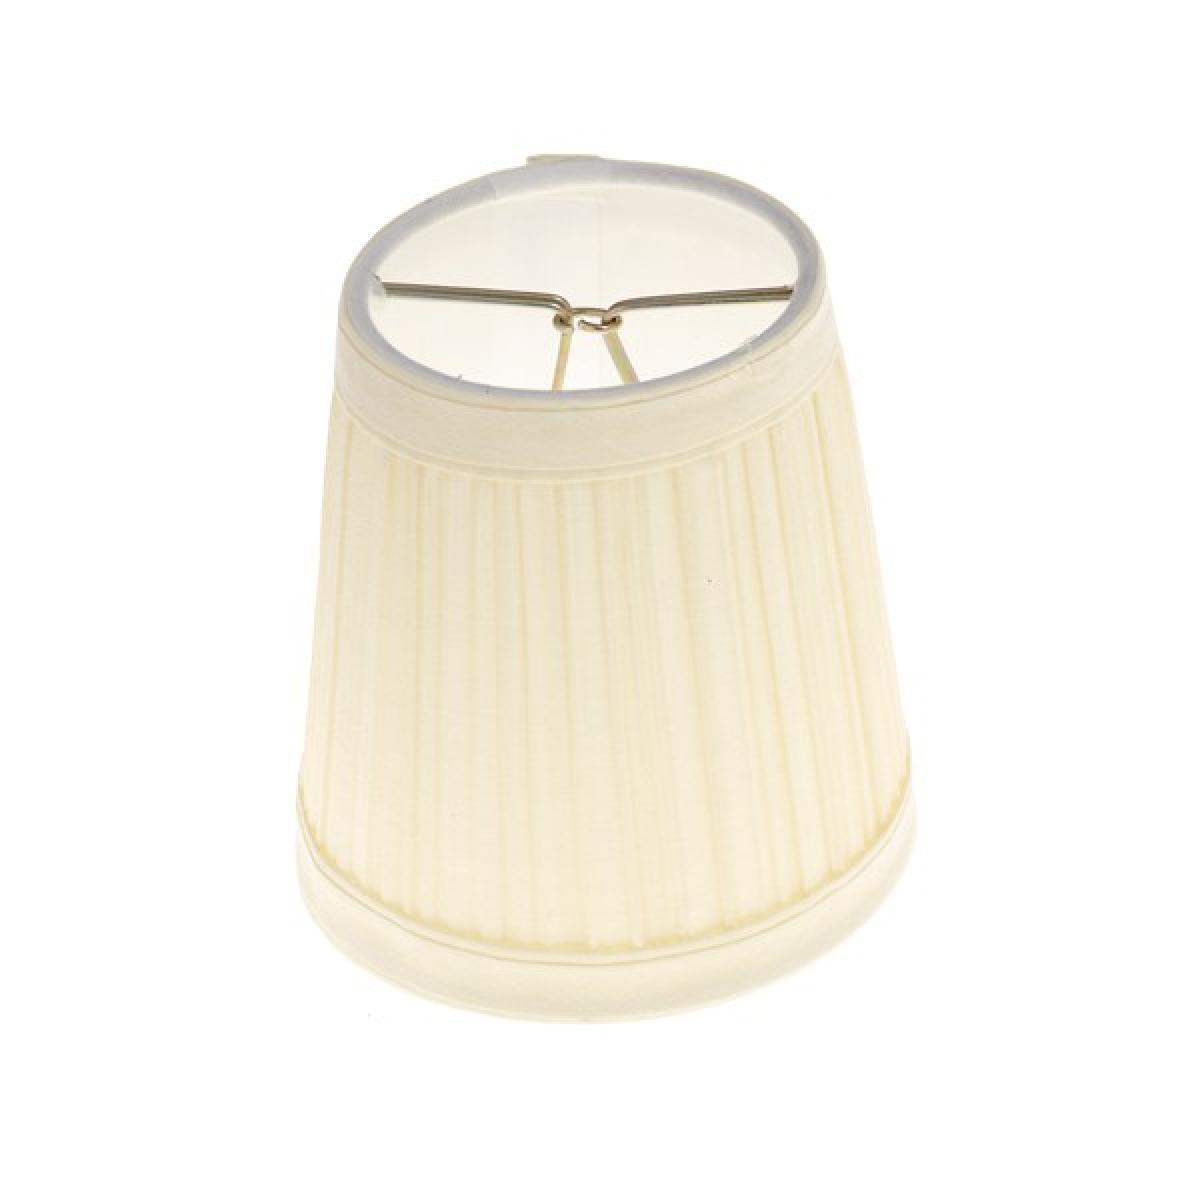 90-1273 BEIGE PLEATED CLIP-ON SHADE